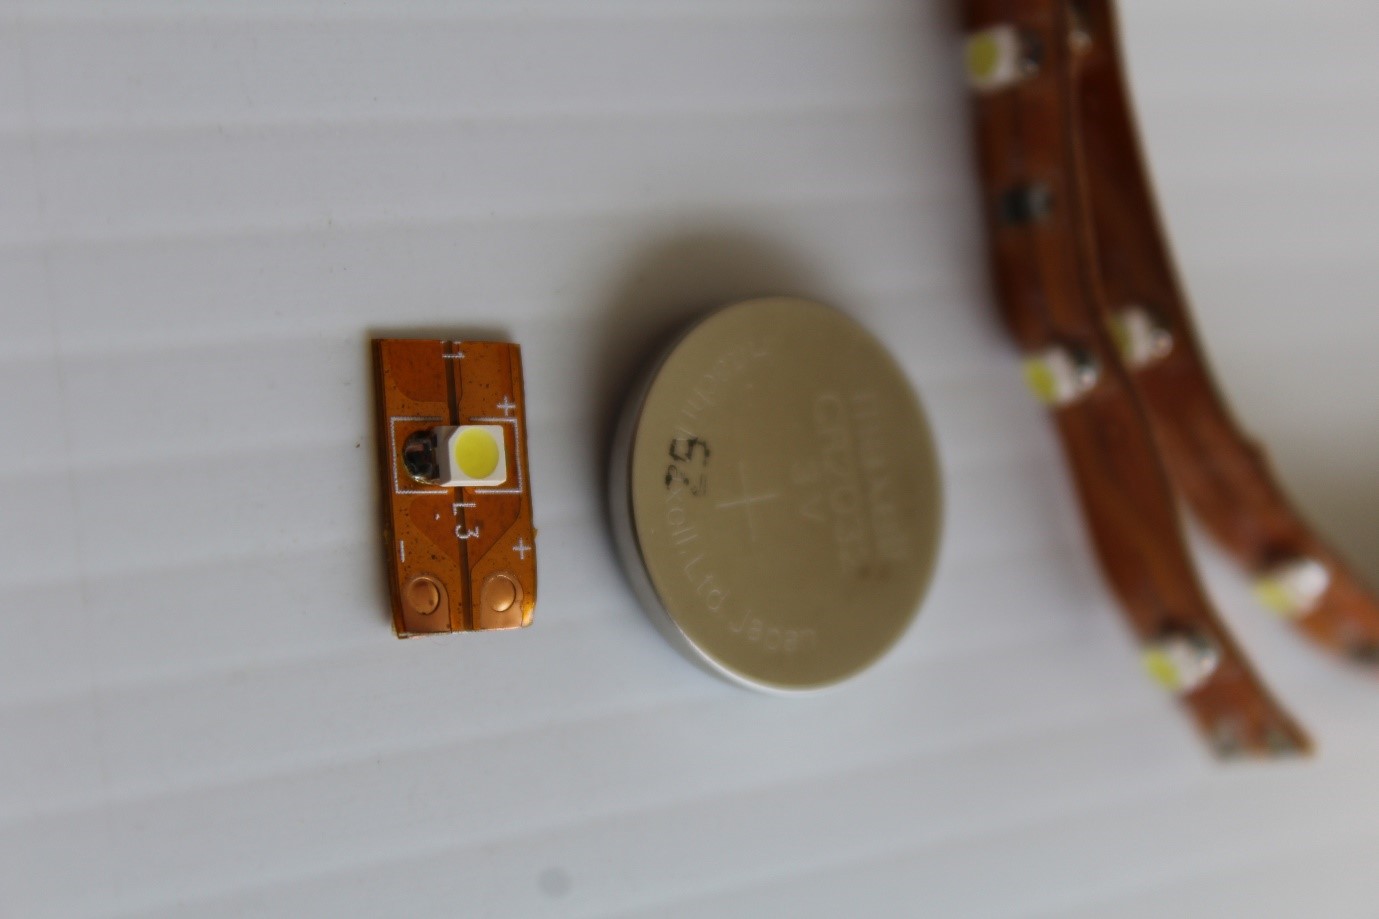 IMAGE: Close up of the LED (front), Battery 3-volt (round shaped-“coin”), copper tape with LED’s in the background.